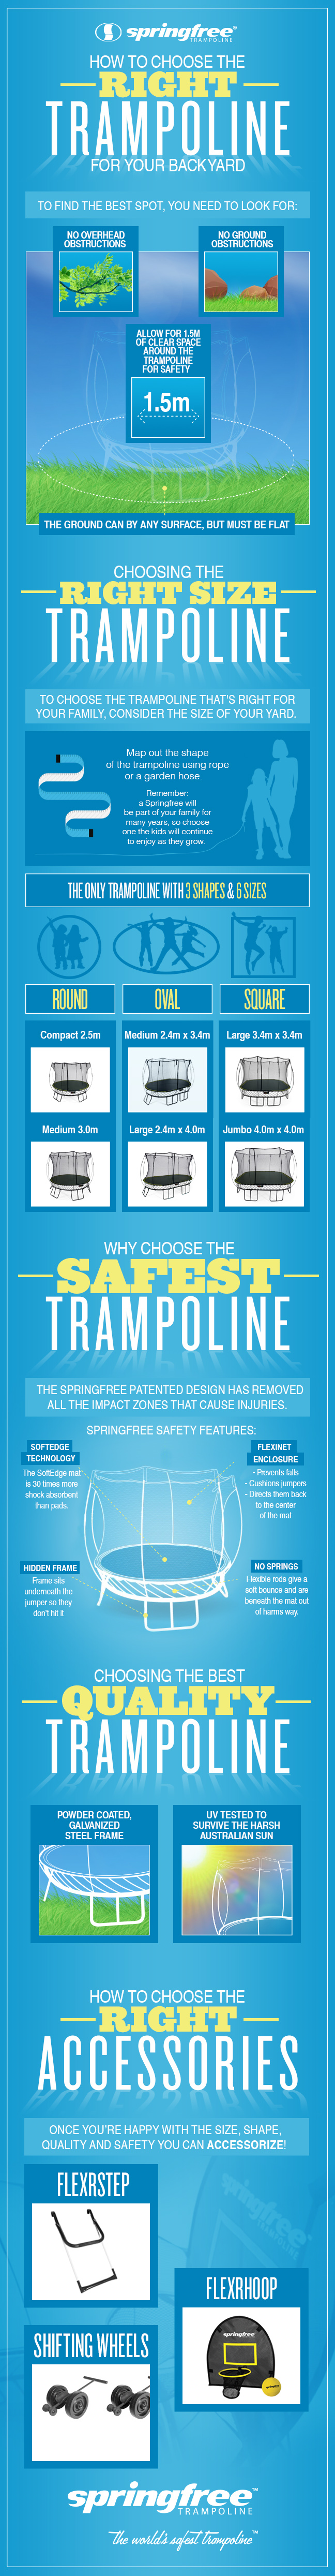 How to choose the right trampoline